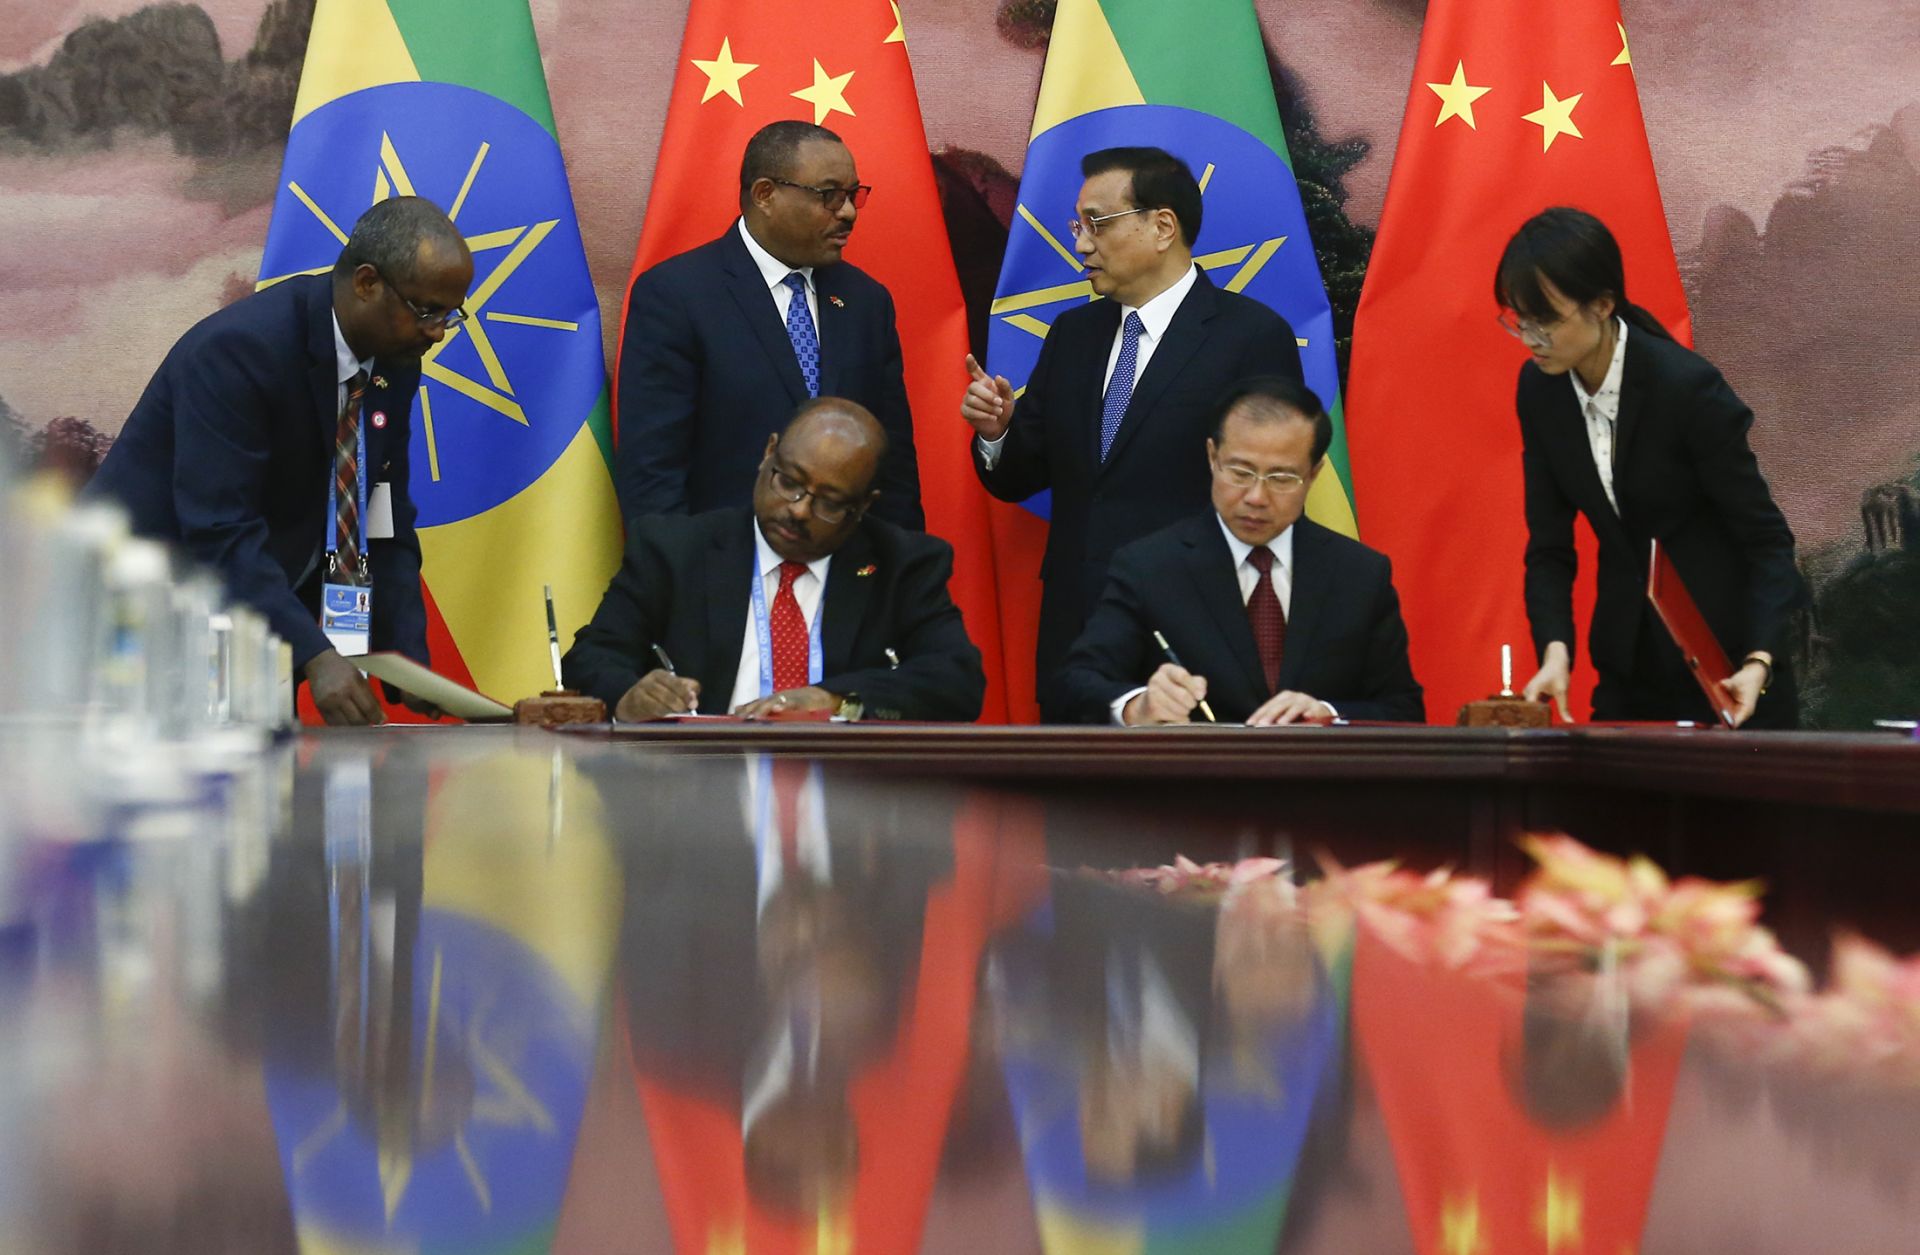 Chinese Premier Li Keqiang and then-Ethiopian Prime Minister Hailemariam Desalegn attend a signing ceremony at the Great Hall of the People in Beijing on May 12, 2017.